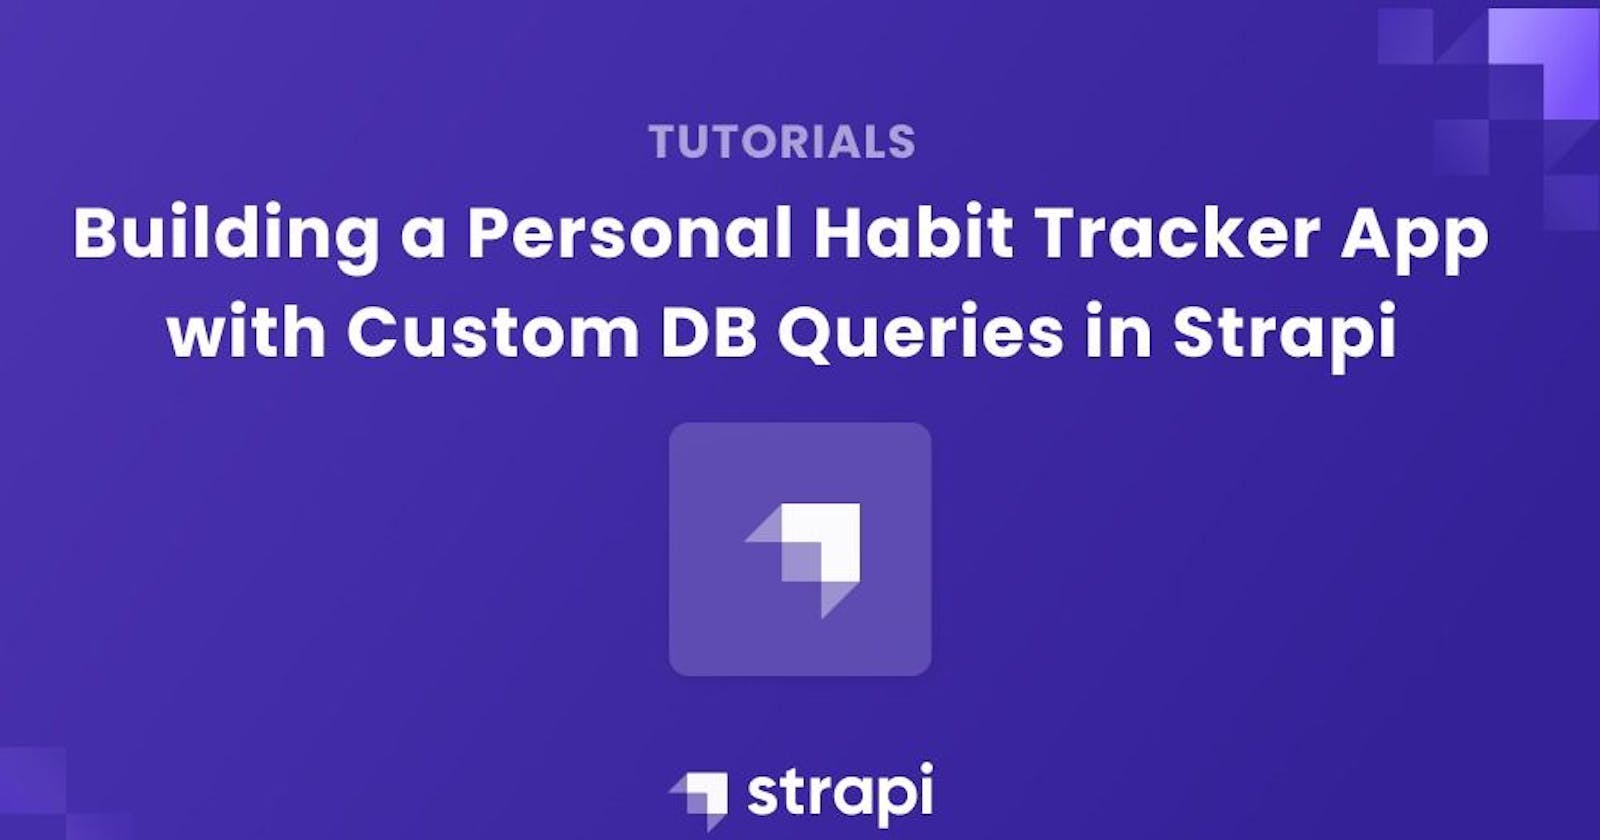 Building a Personal Habit Tracker App with Custom DB Queries in Strapi